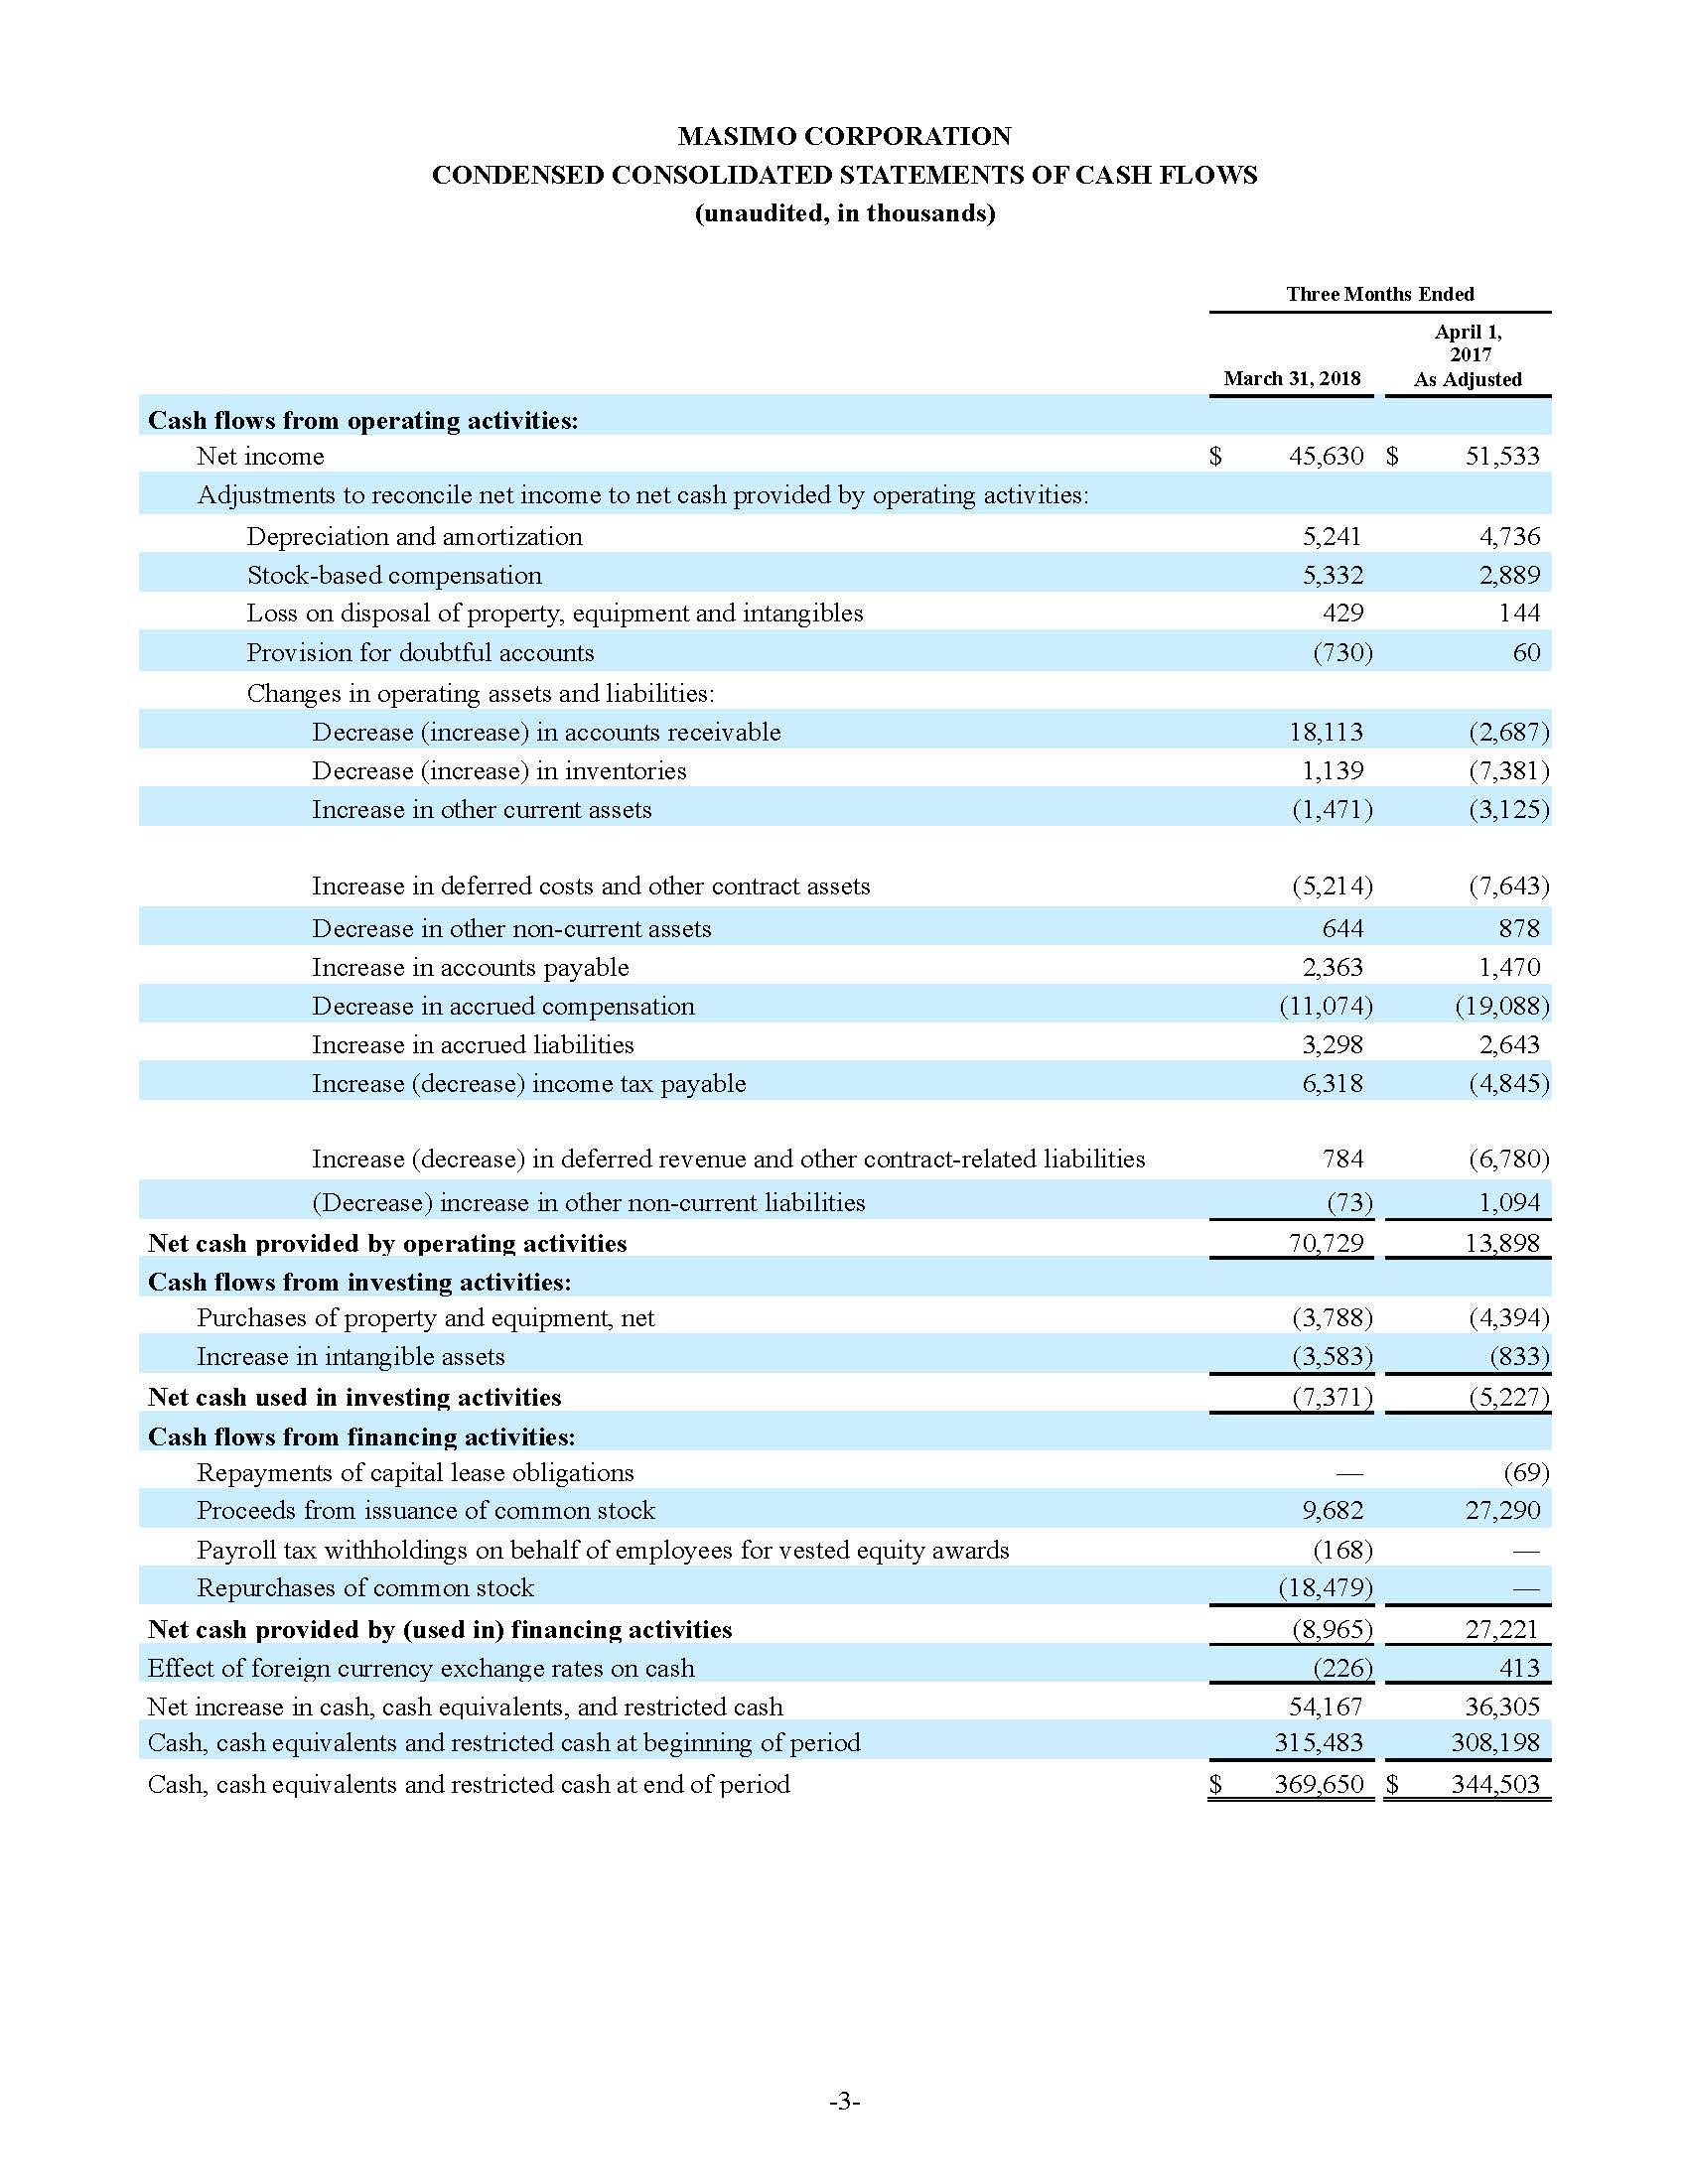 CONDENSED CONSOLIDATED statement of cash flows